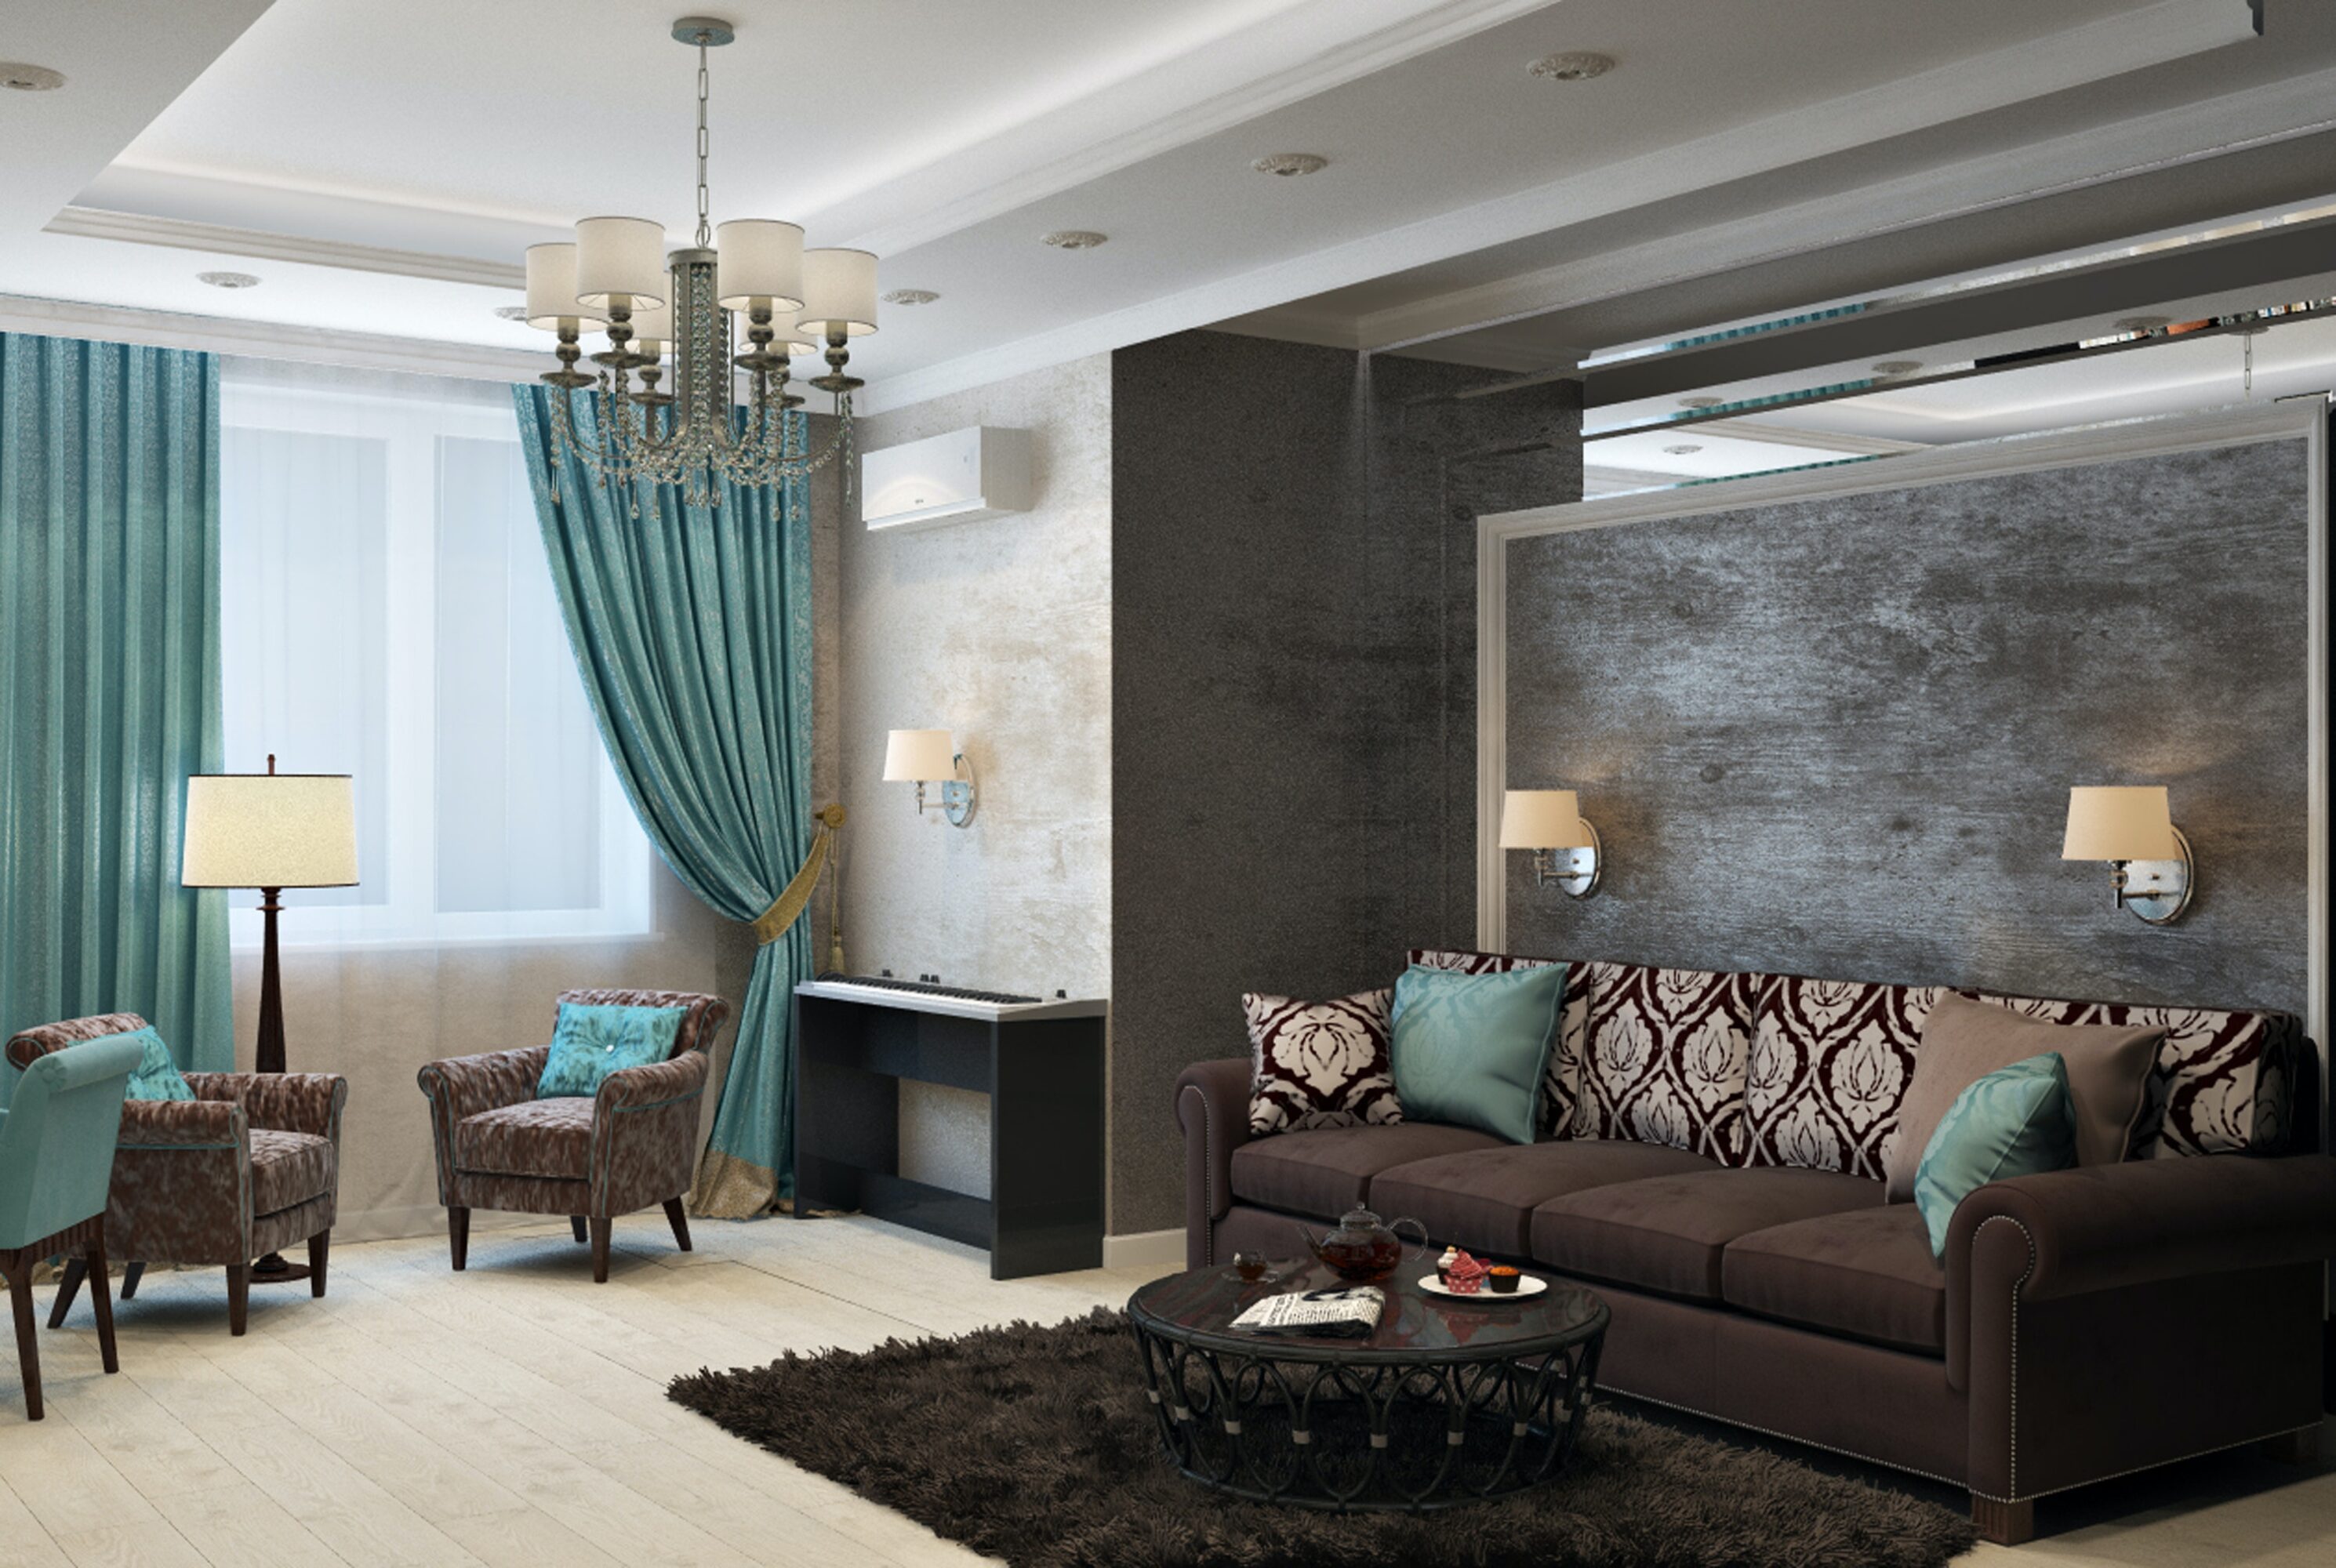 An elegant living room with a beautiful brown sofa and armchairs with teal details